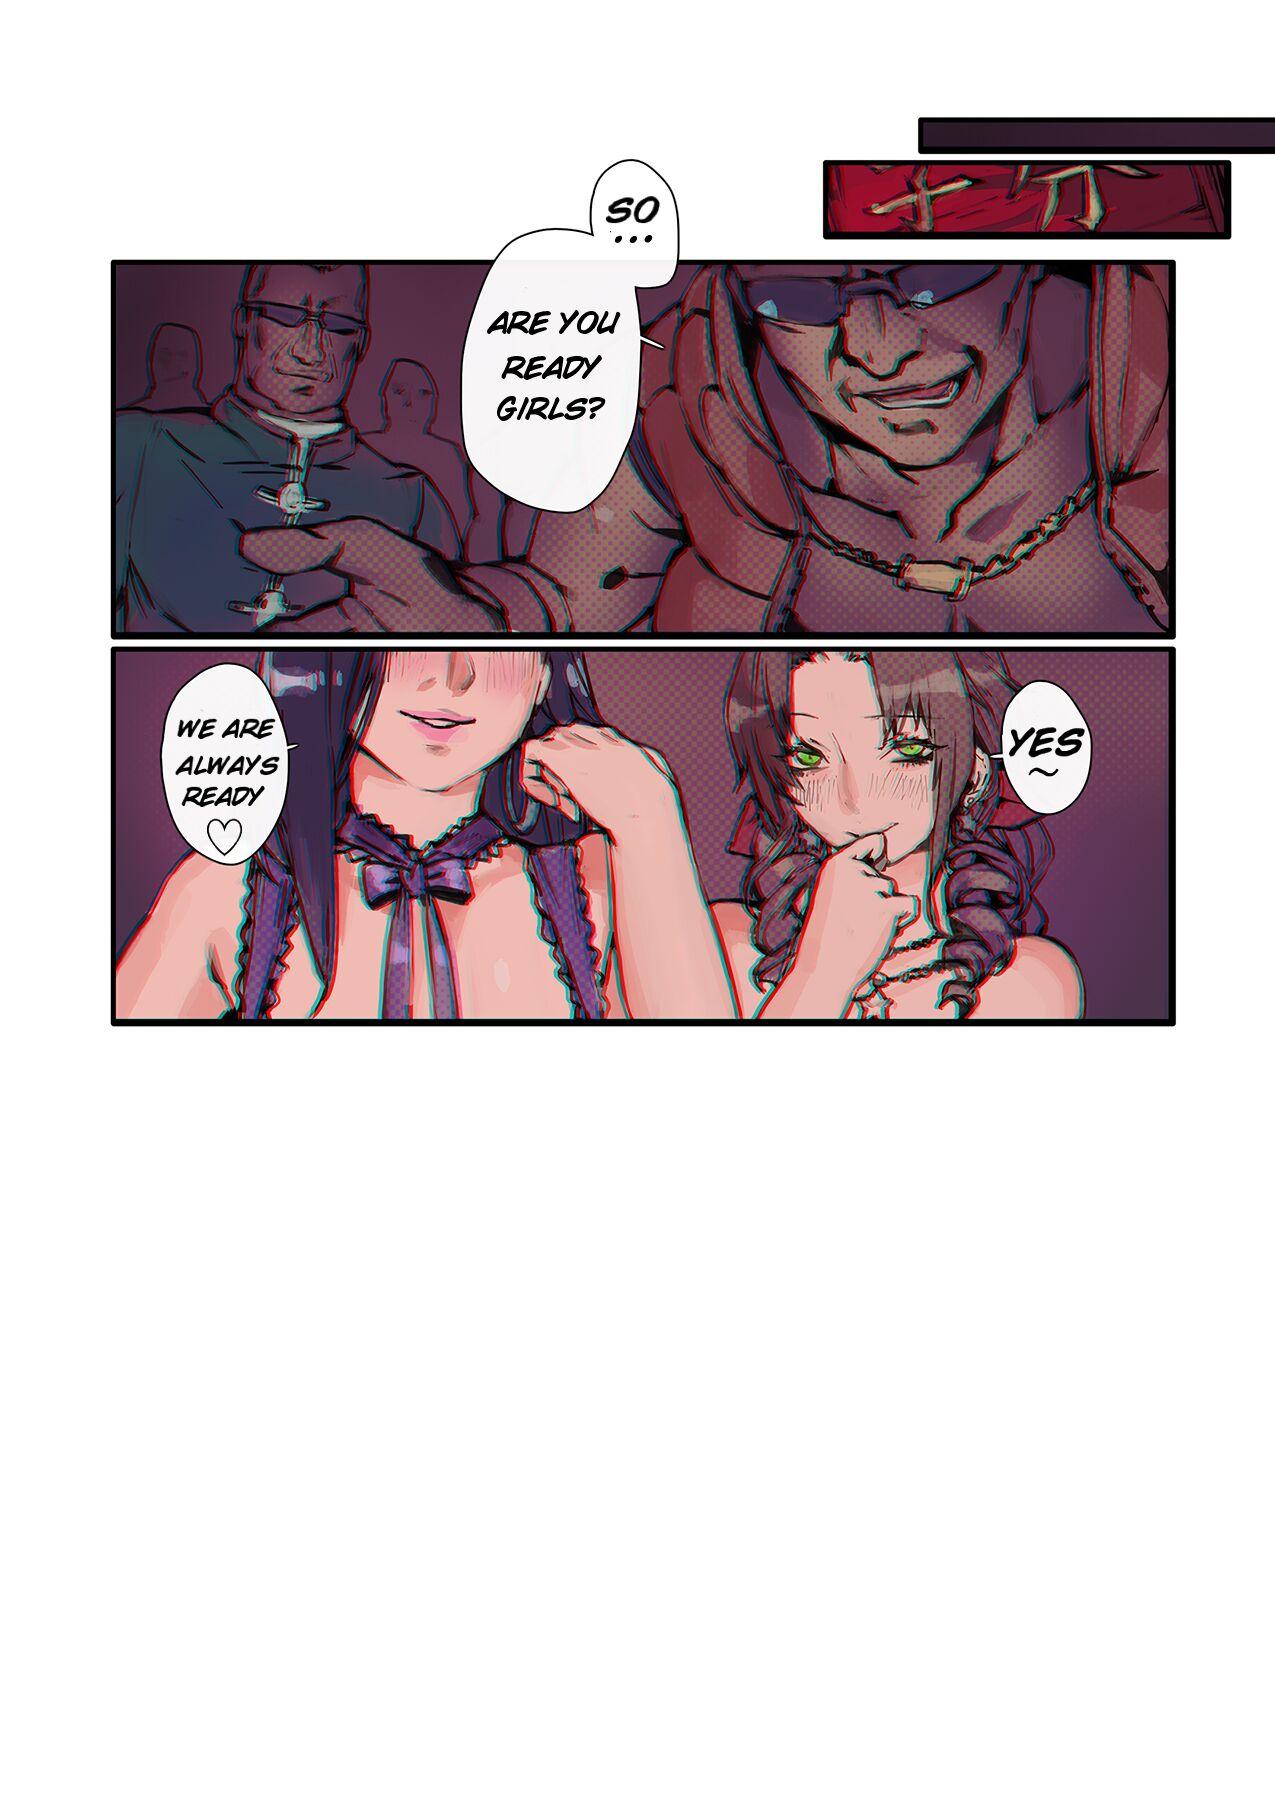 Real The Escort and the Flower Girl - Final fantasy vii Free Teenage Porn - Page 2